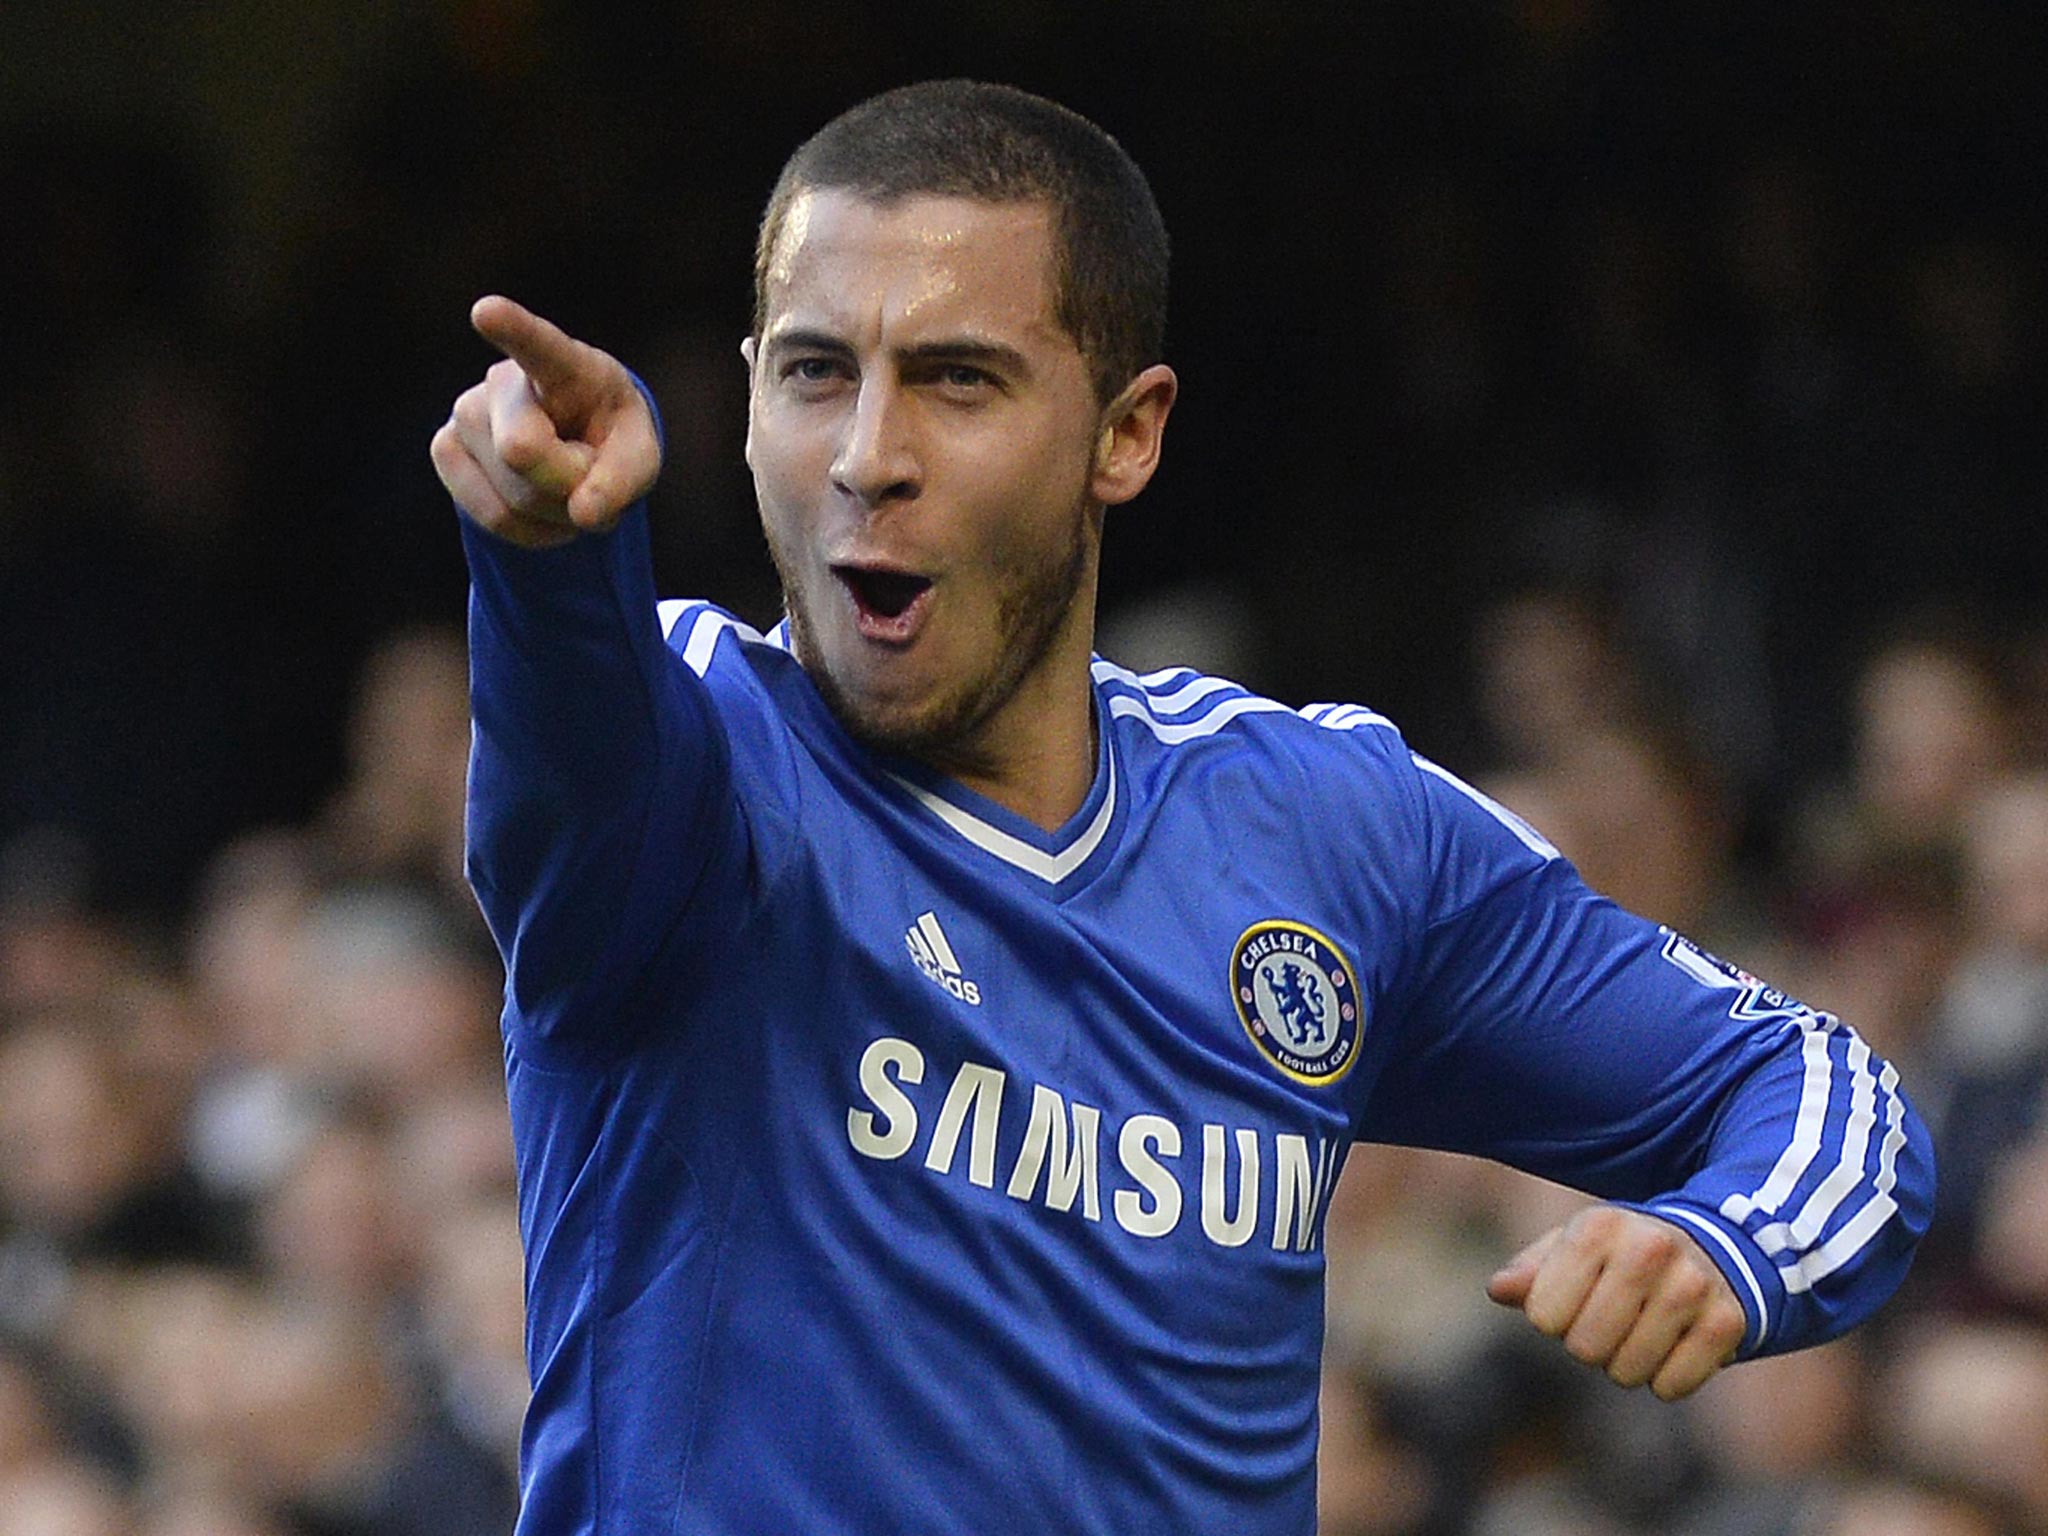 Eden Hazard was hailed as a “fantastic player” by Chelsea manager Jose Mourinho